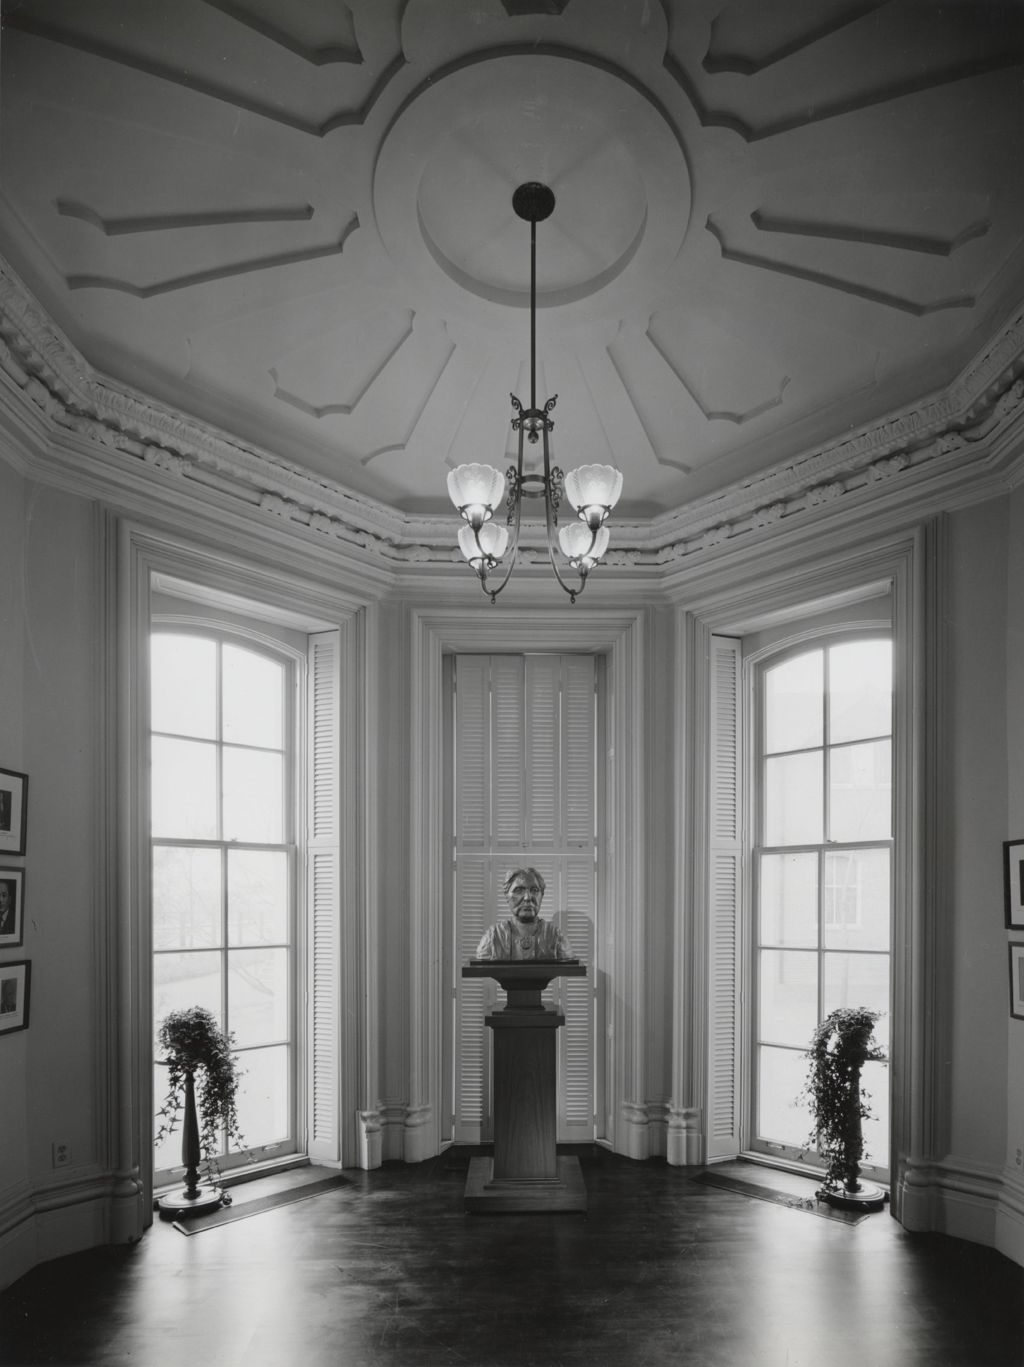 Restored Octagon Room of Hull Mansion with bust of Jane Addams, just prior to Jane Addams Hull-House Museum opening